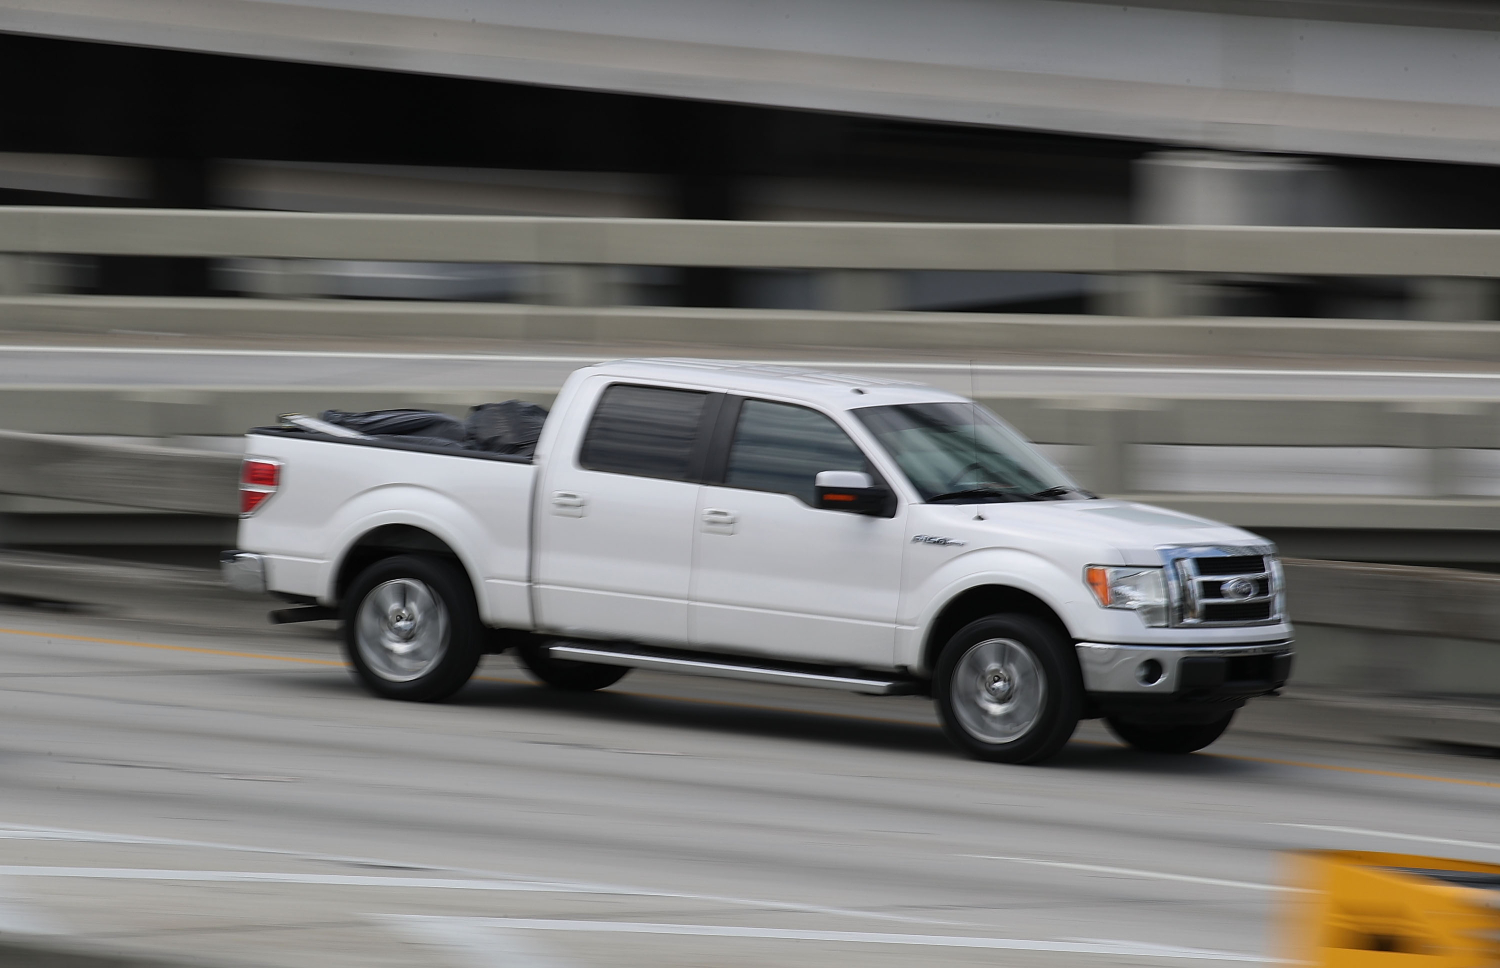 The Ford F-Series pickup trucks is a frequent target of catalytic converter thefts